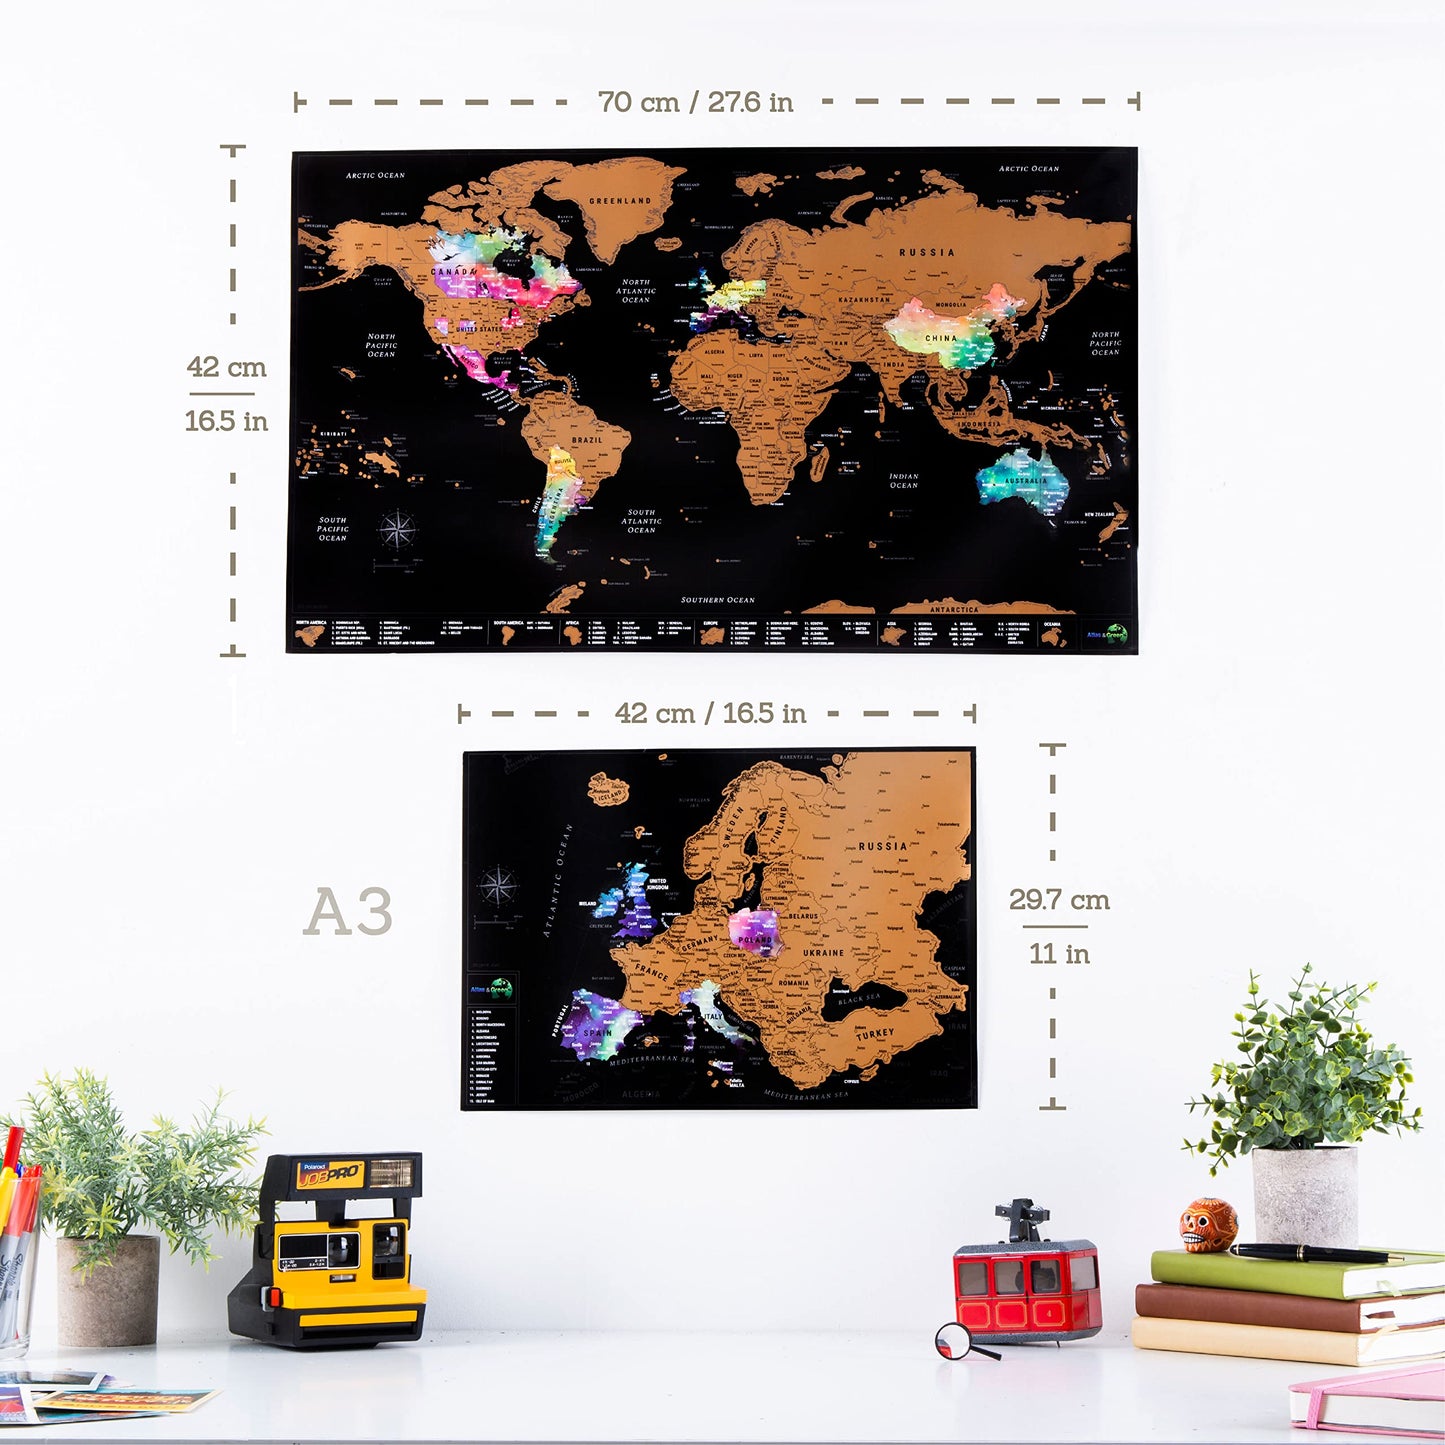 Scratch Off World Map Poster + BONUS Europe Map - Detailed travel maps in Nebula Watercolour - with Accessories Kit and Gift Tube